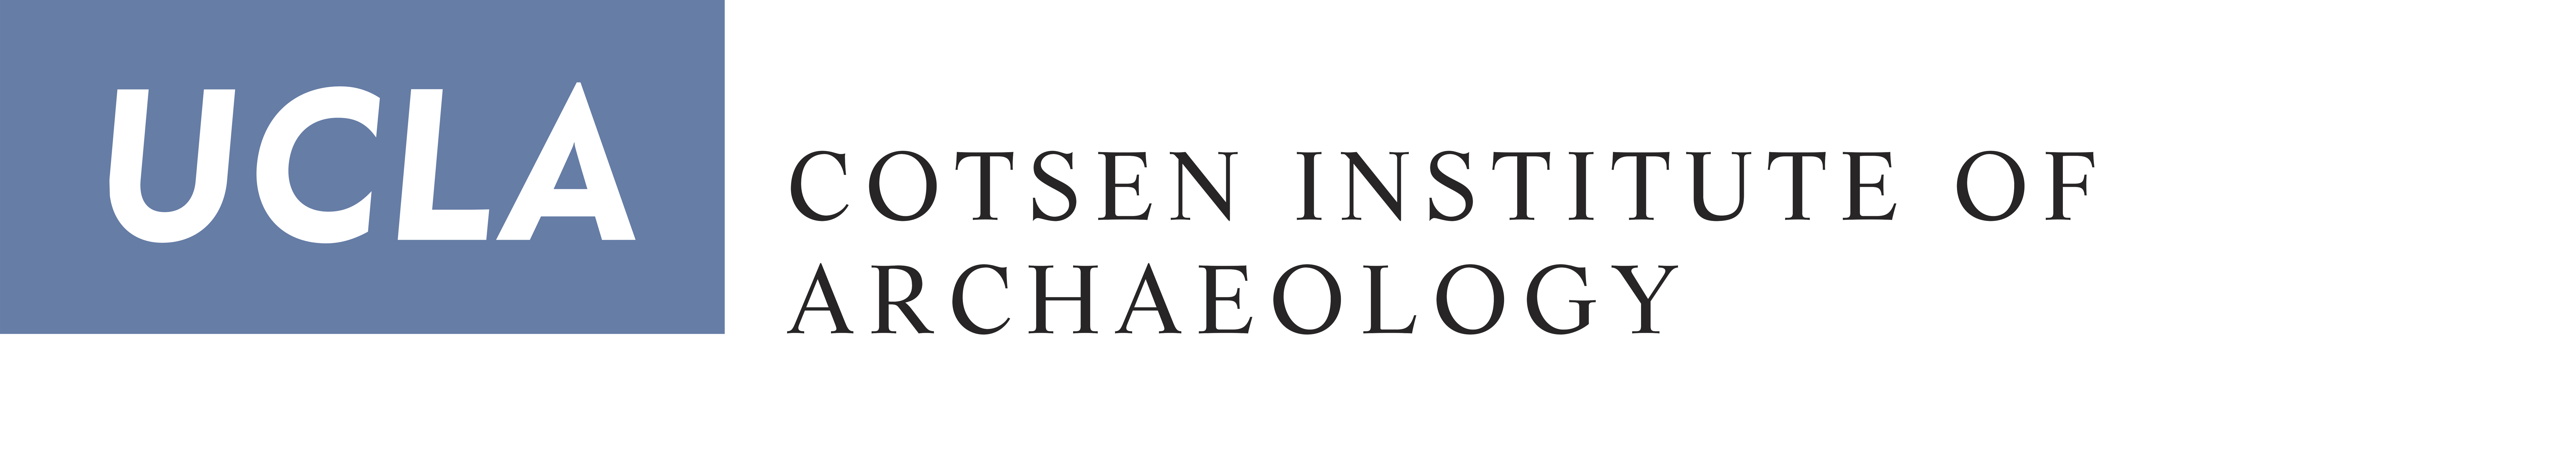 UCLA Cotsen Institute of Archaeology